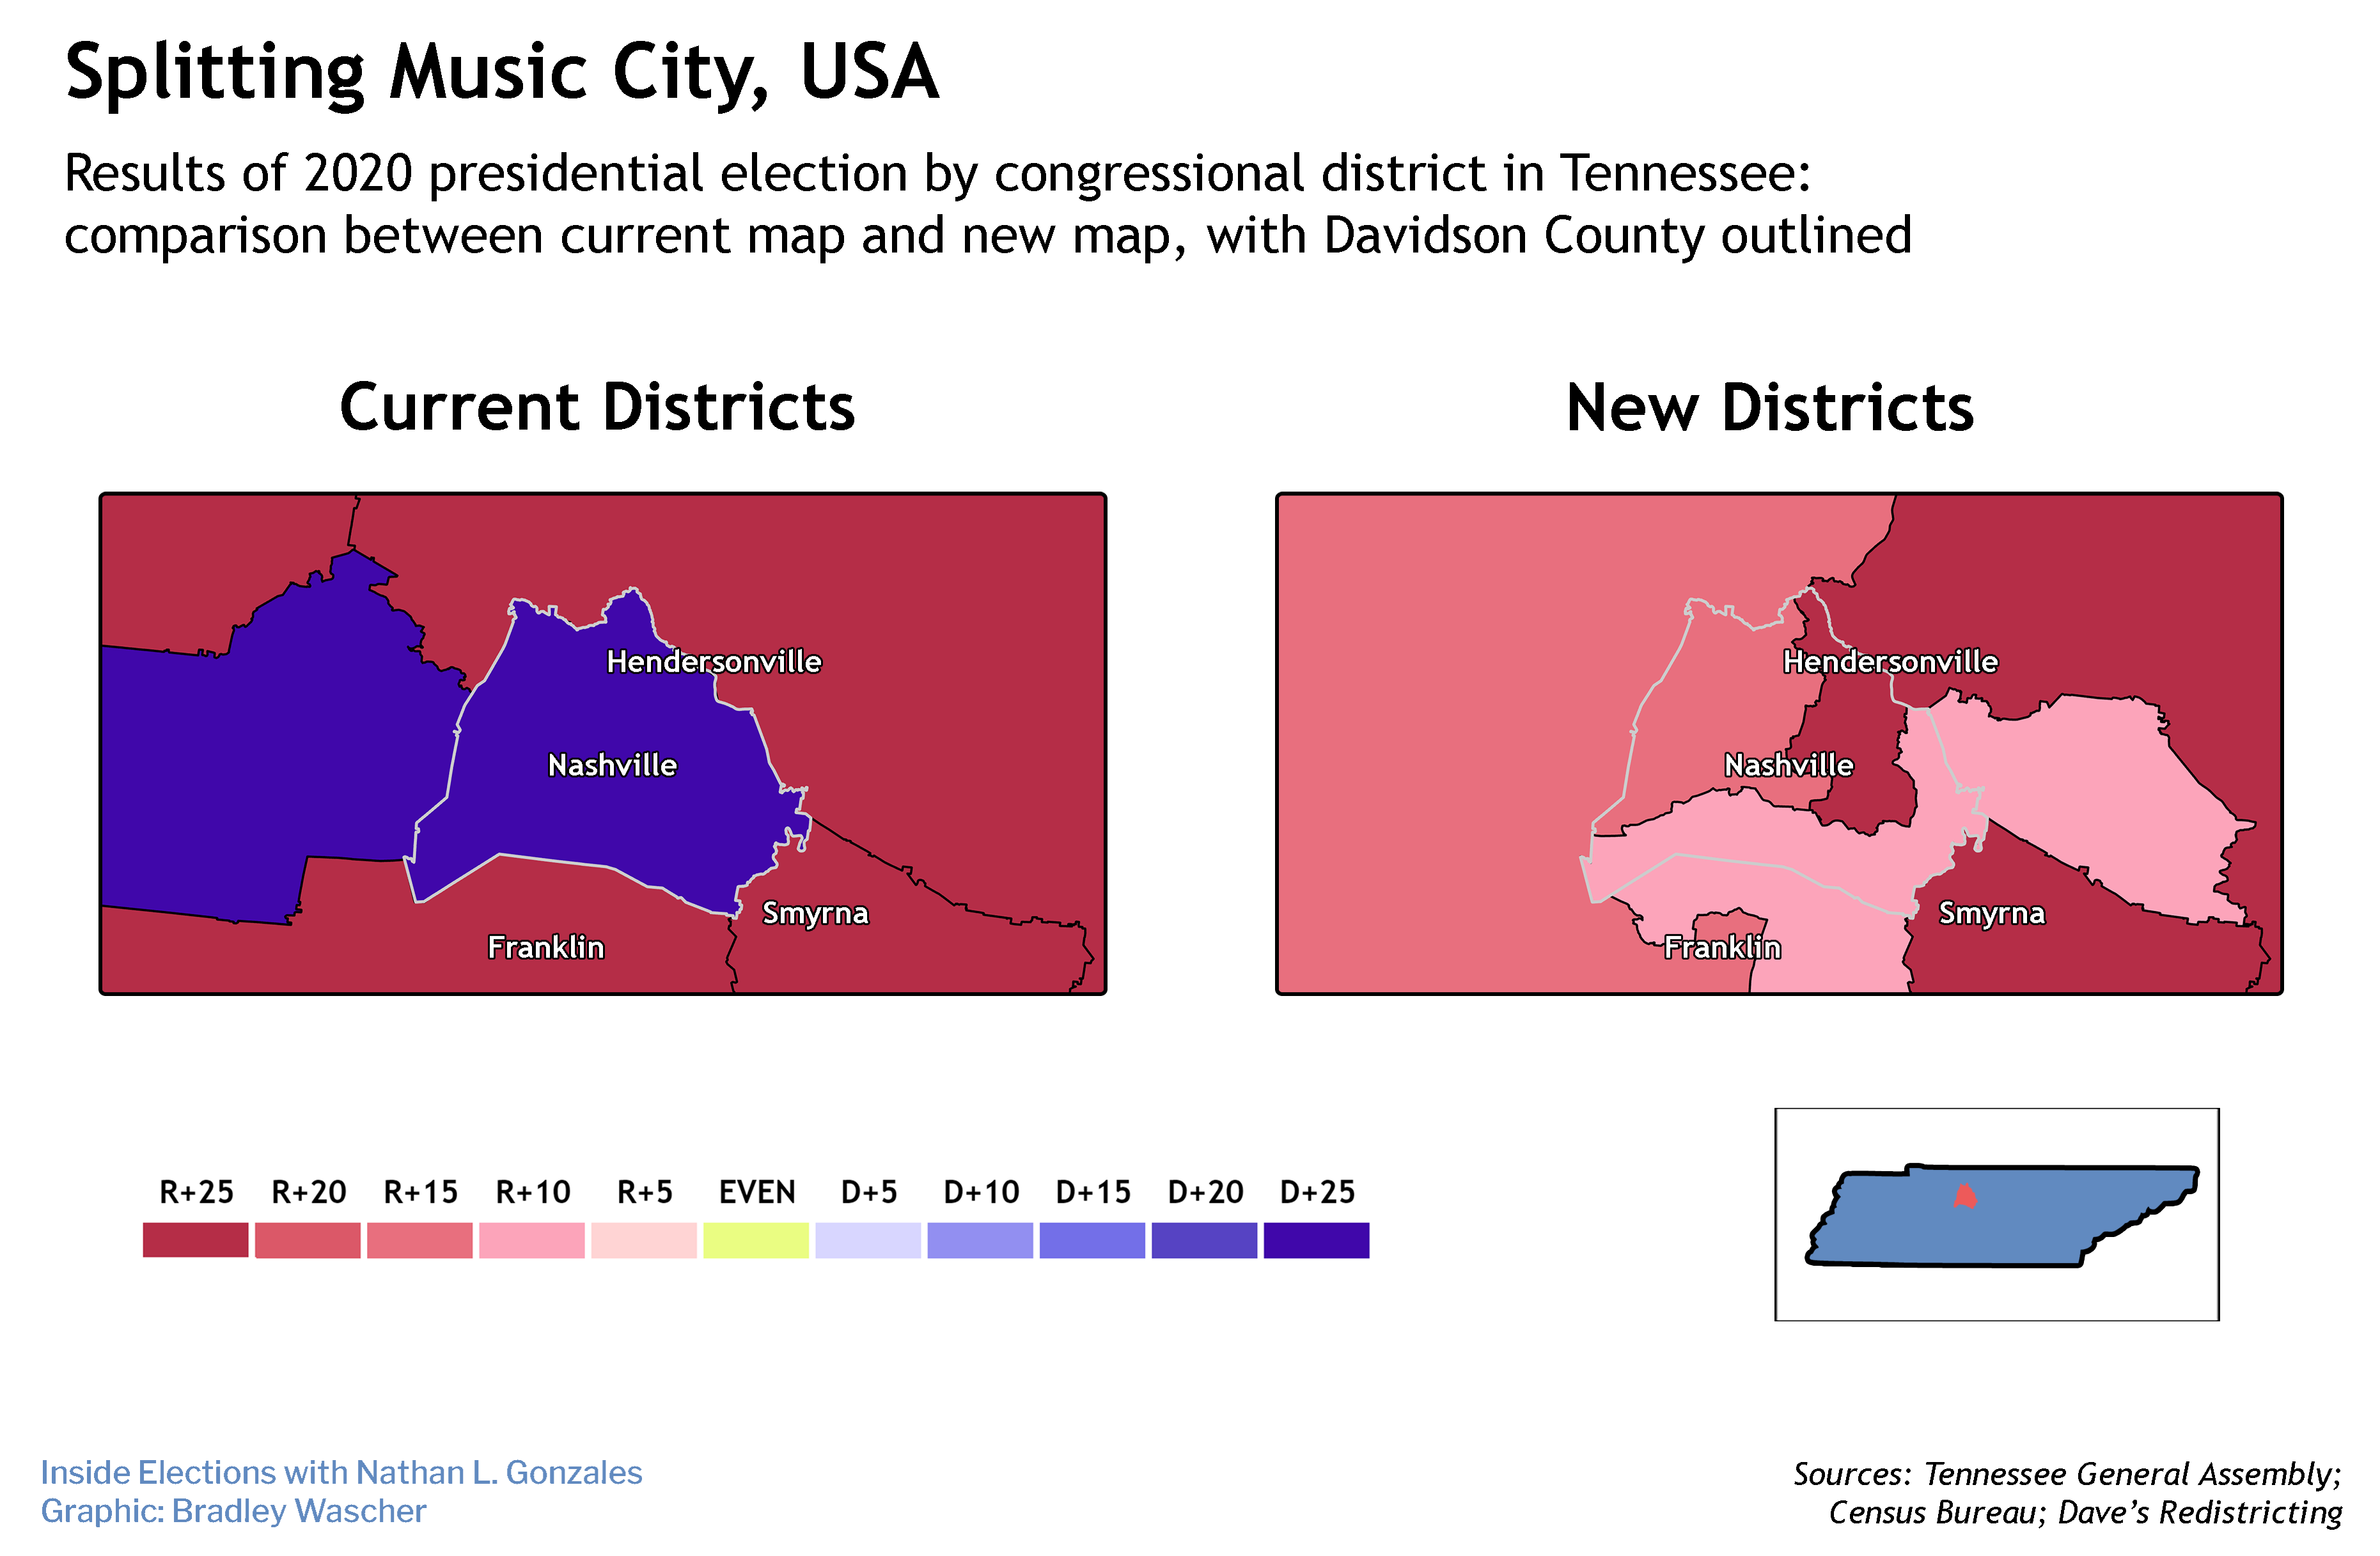 tennessee-redistricting-down-a-democratic-district-on-music-row-news